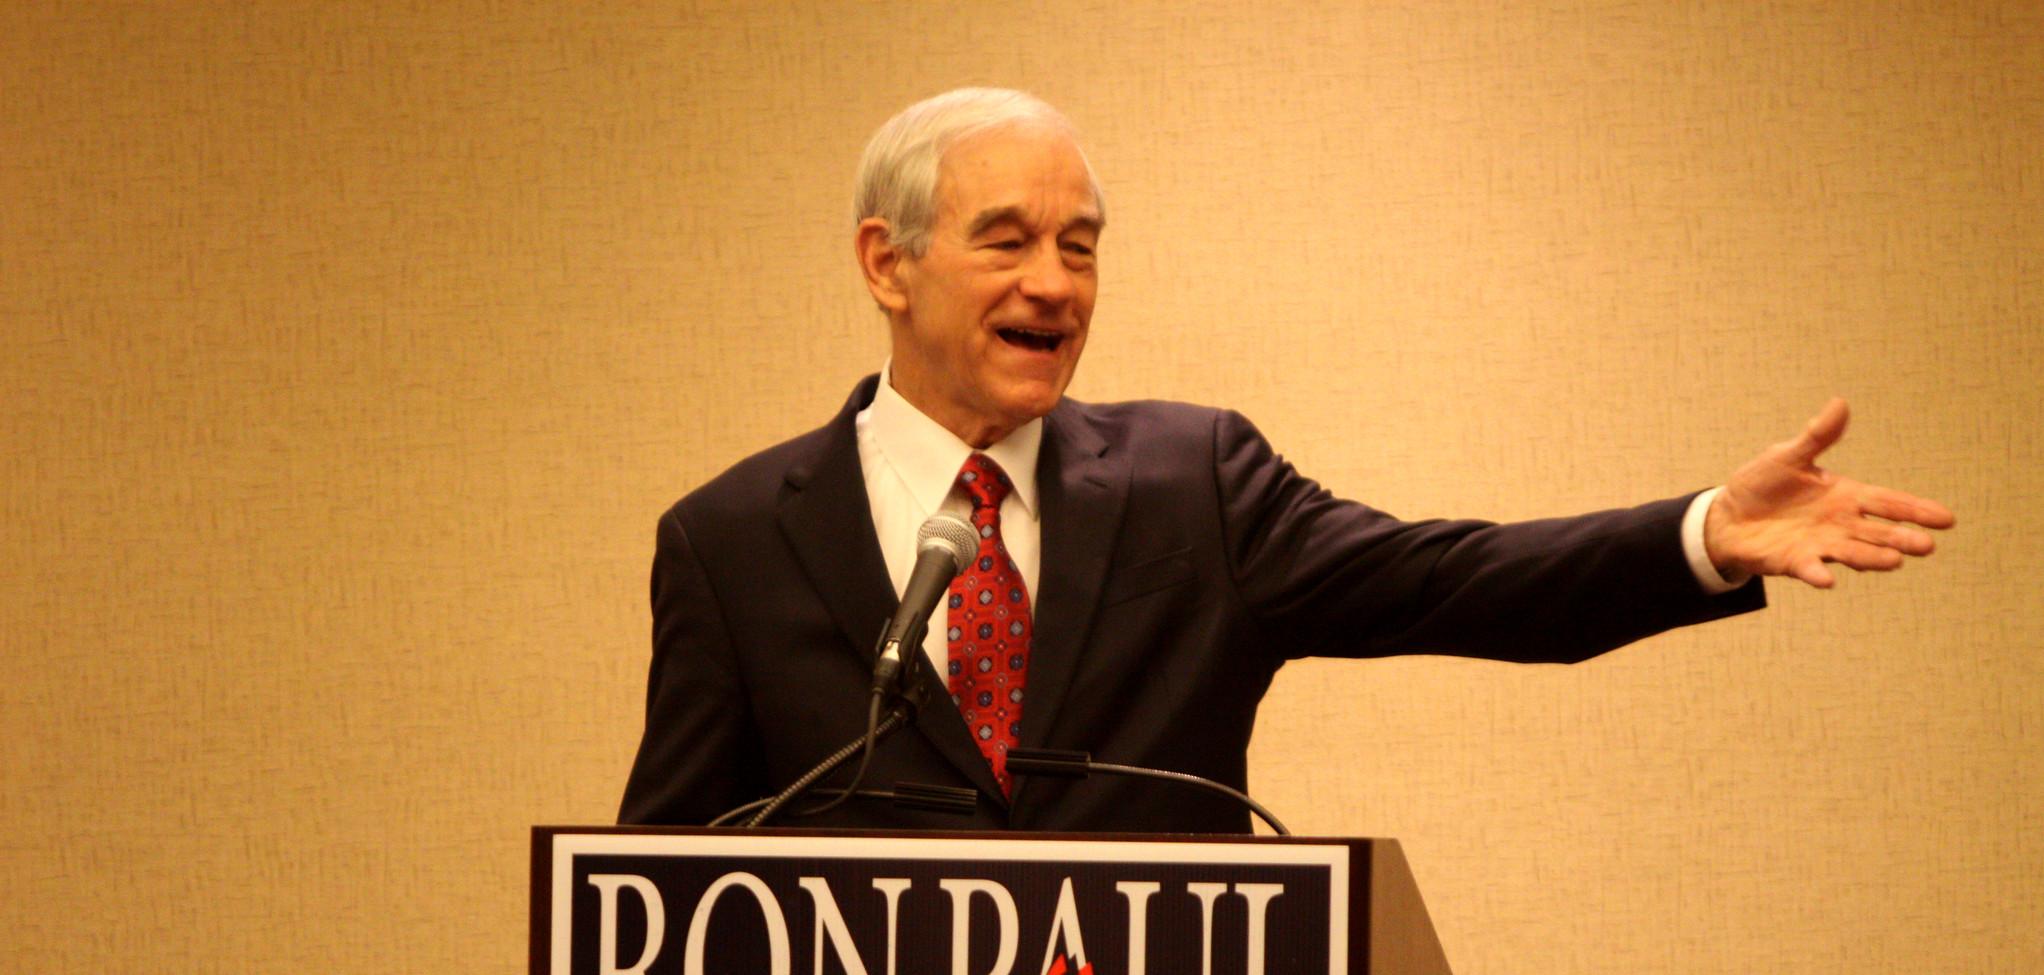 A man in a suit talking into a mic and pointing to his left. A sign on the podium says "Ron Paul, 2012, Restore America Now"